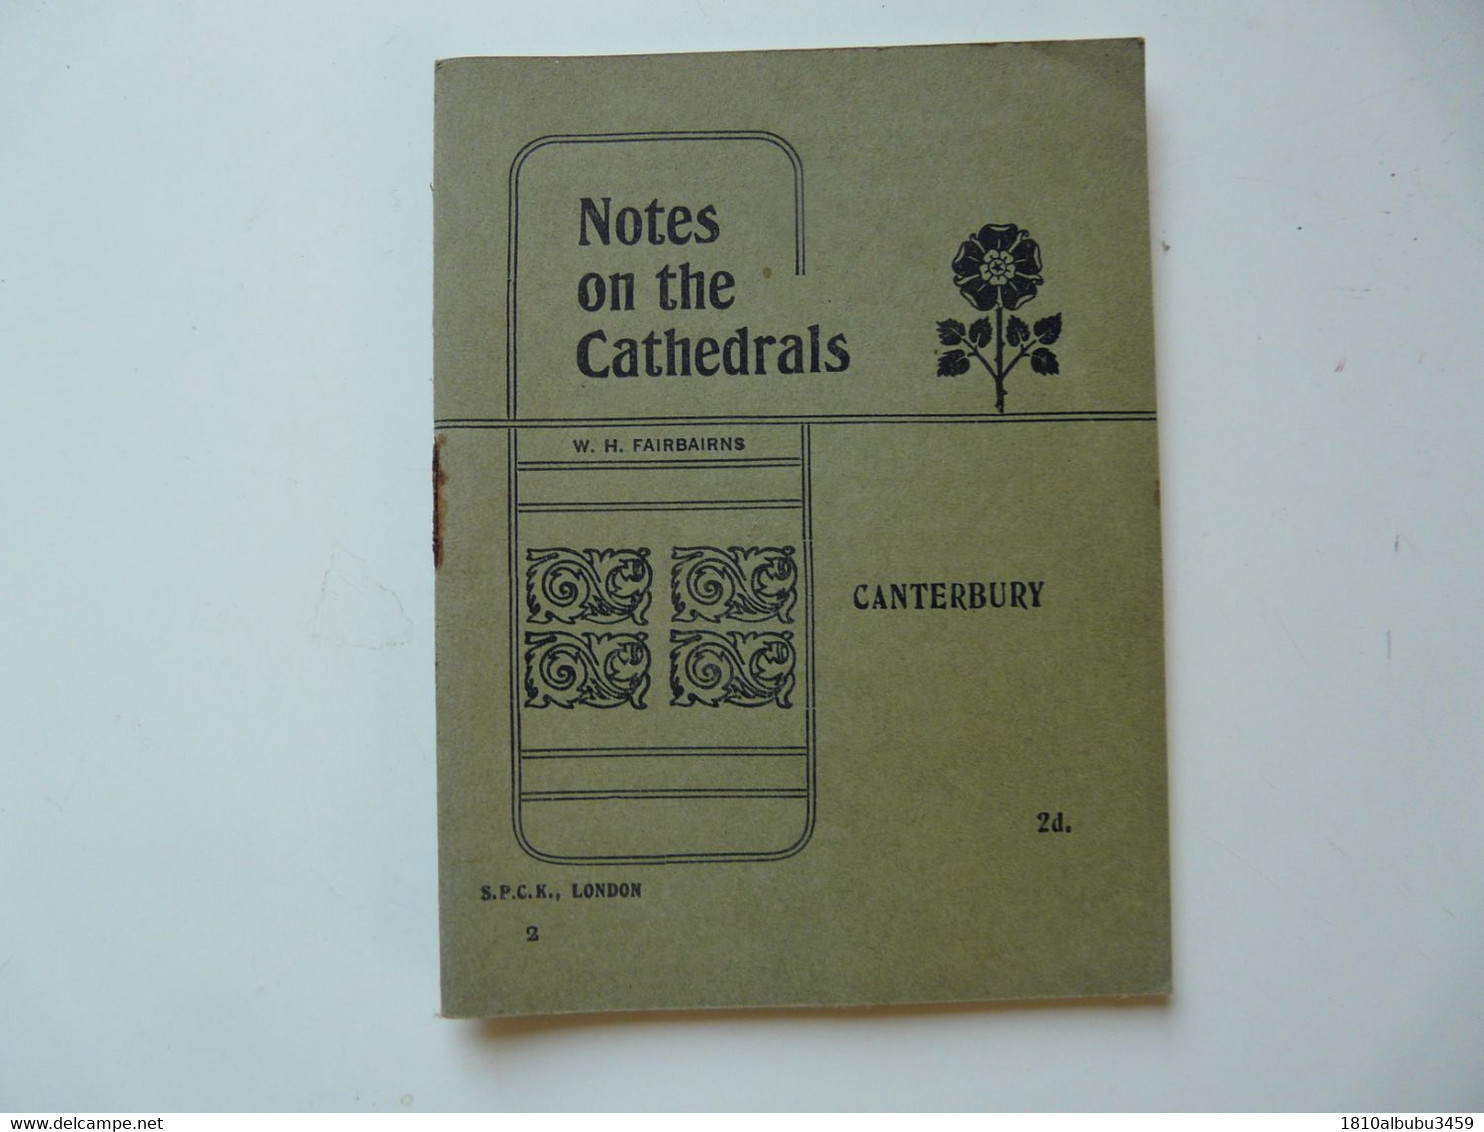 NOTES ON THE CATHEDRALS - Architecture